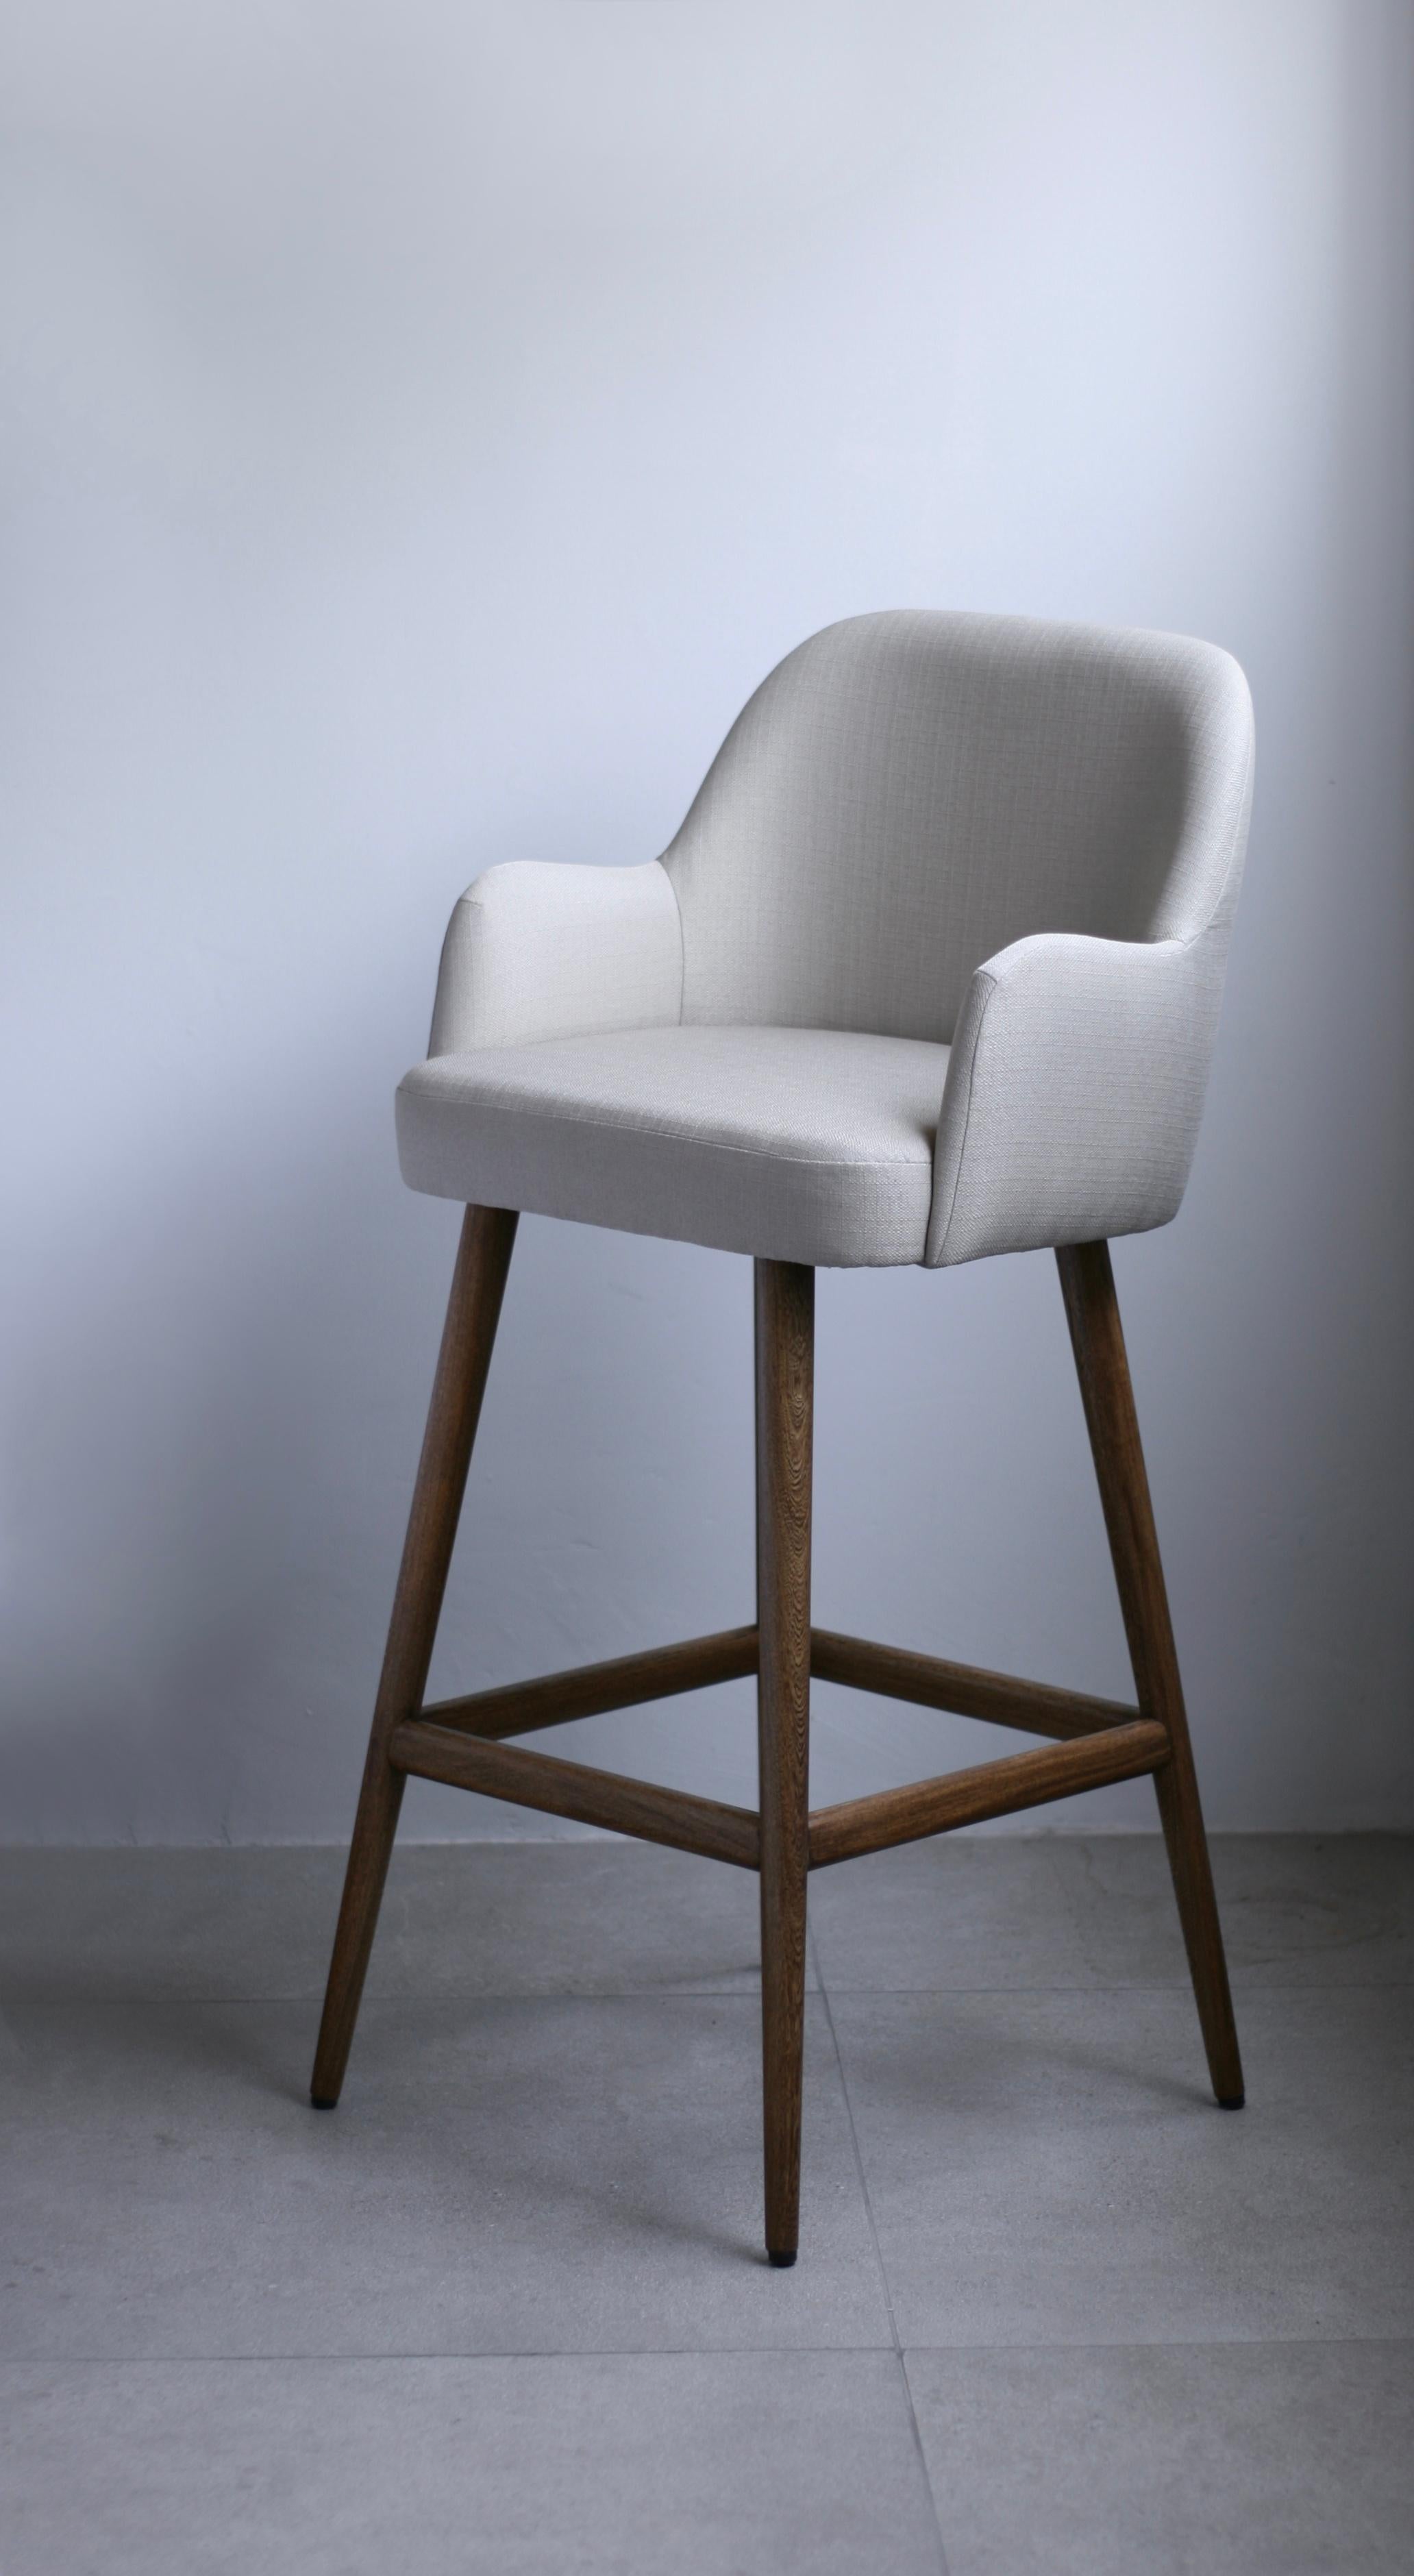 Helsinki collection. Helsinki bar arm stool: simple, elegant, comfortable. Available in oak and walnut base or in custom materials, may be upholstered with variety of fabrics and colors. Also available as a chair and stool. 

Our clients´ favorite